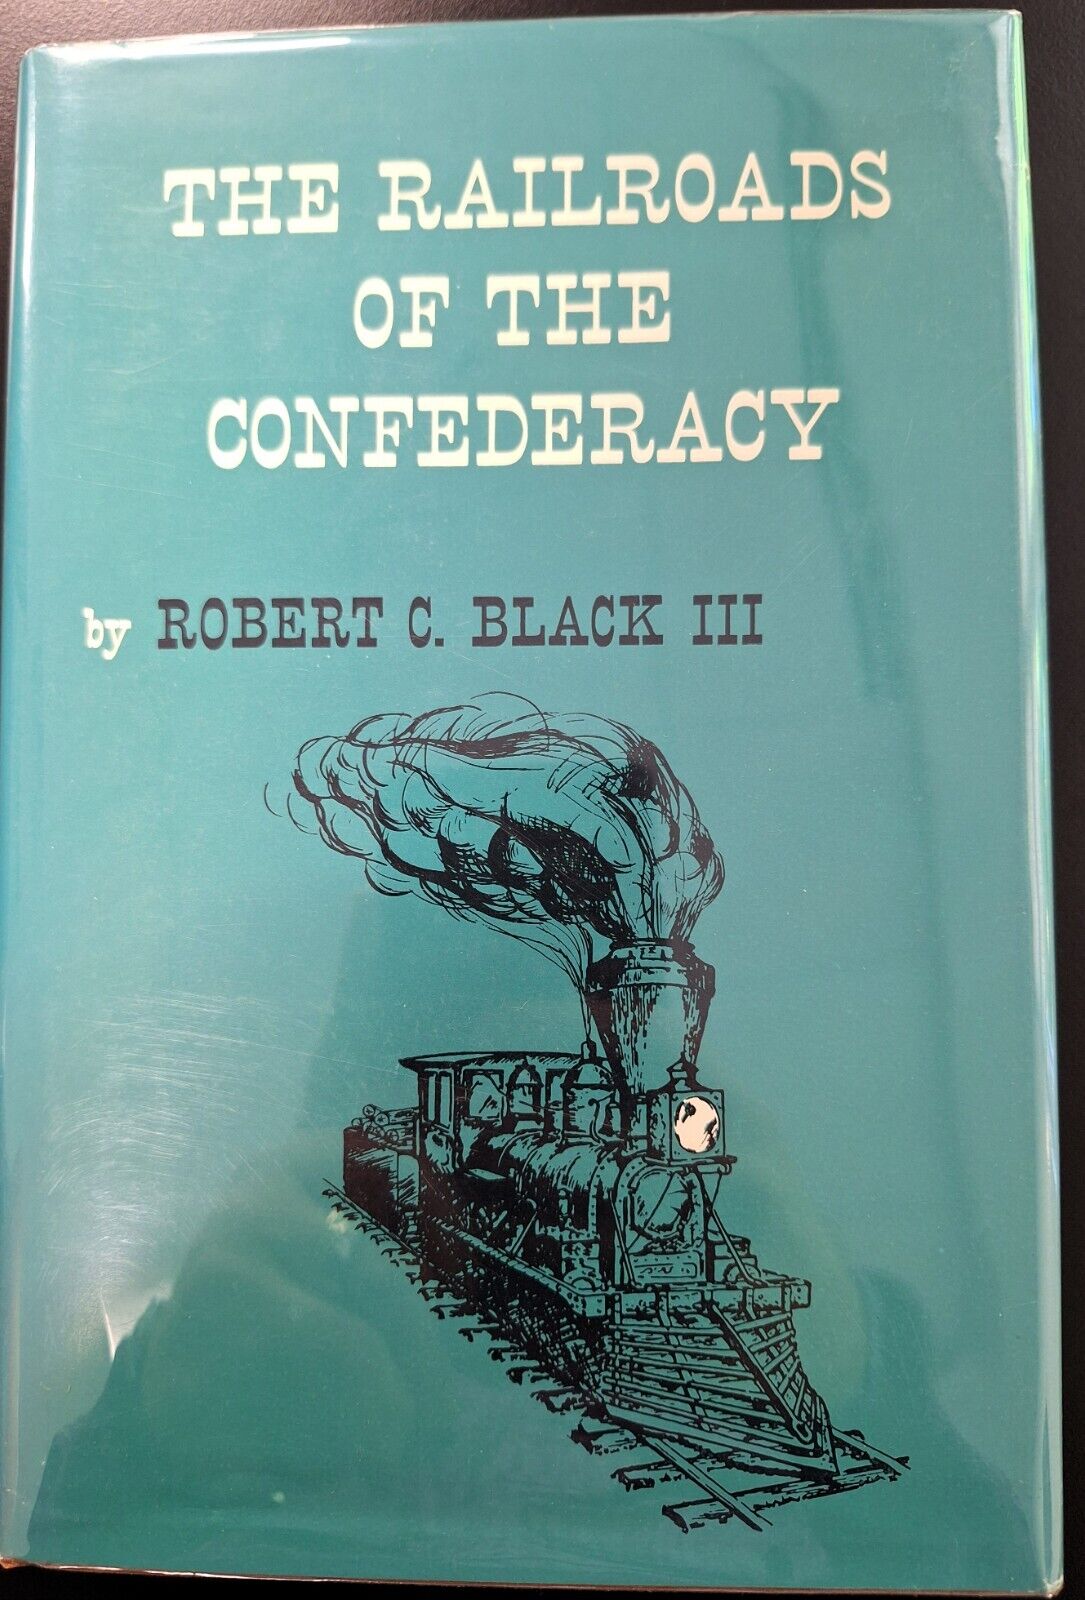 The Railroads of the Confederacy (w/ map), by Robert Black III